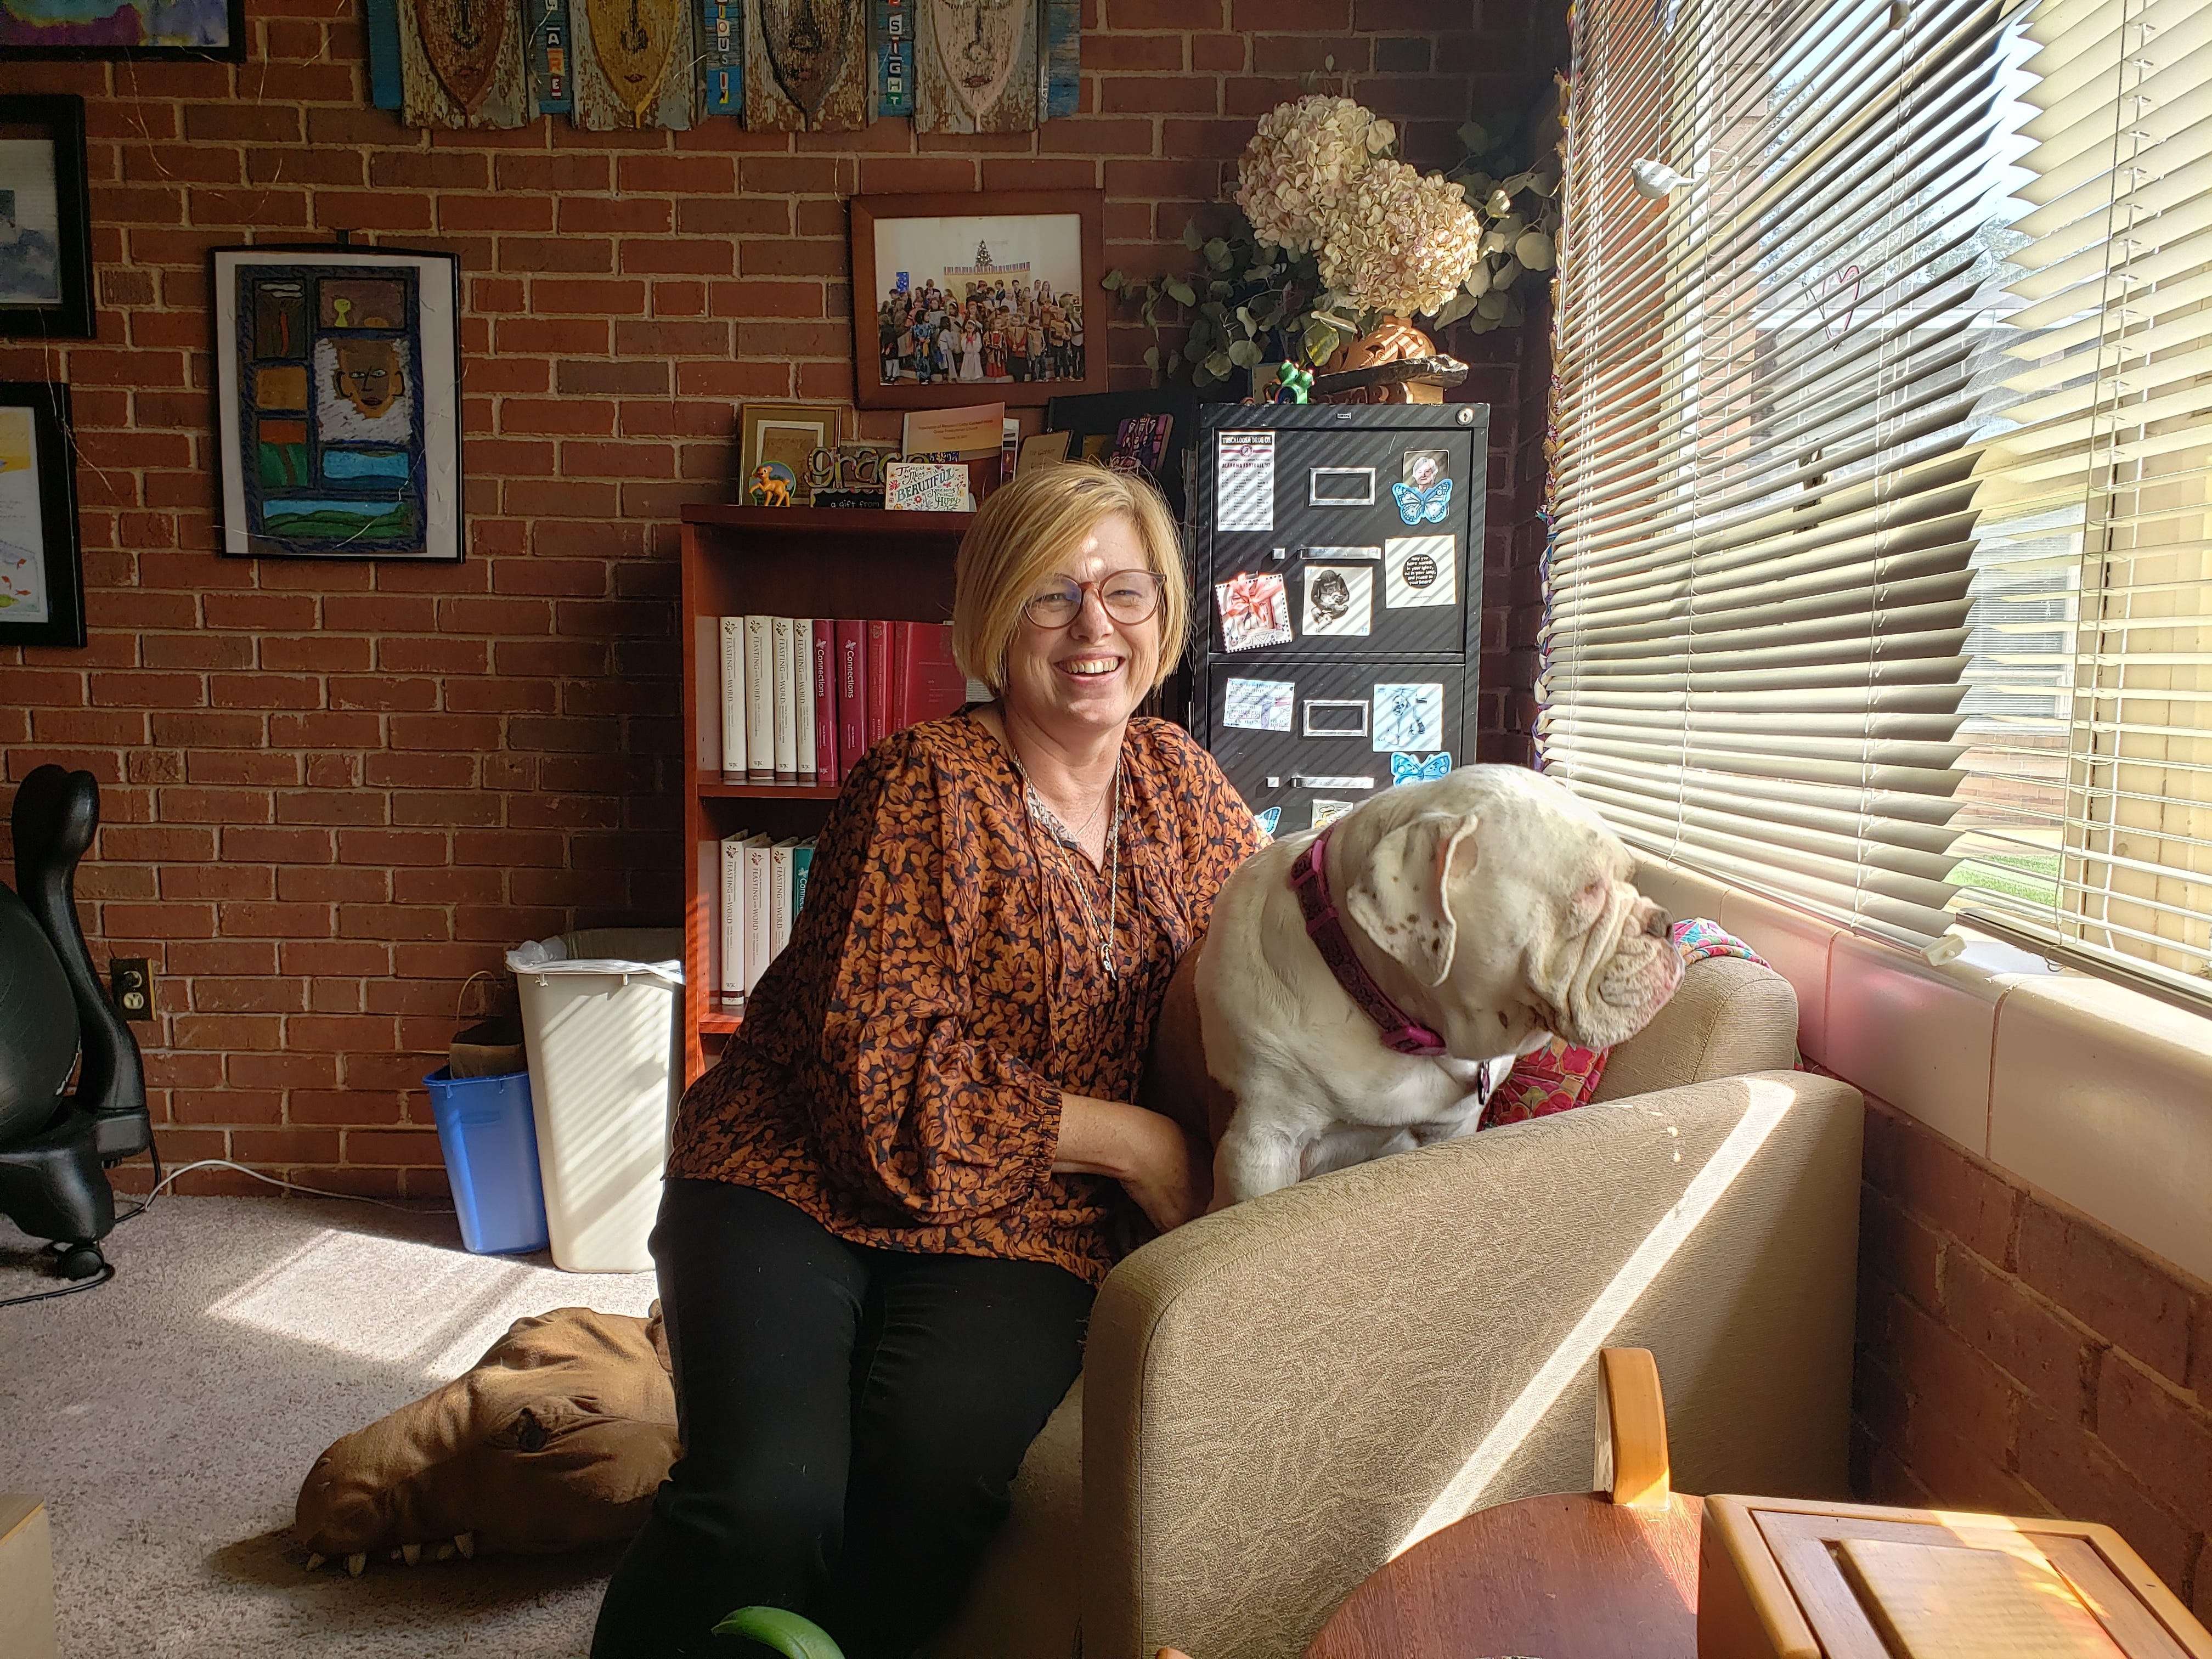 The Rev. Cathy Caldwell Hoop, and her ever-present friend Lily, in Hoop's office at Grace Presbyterian Church.